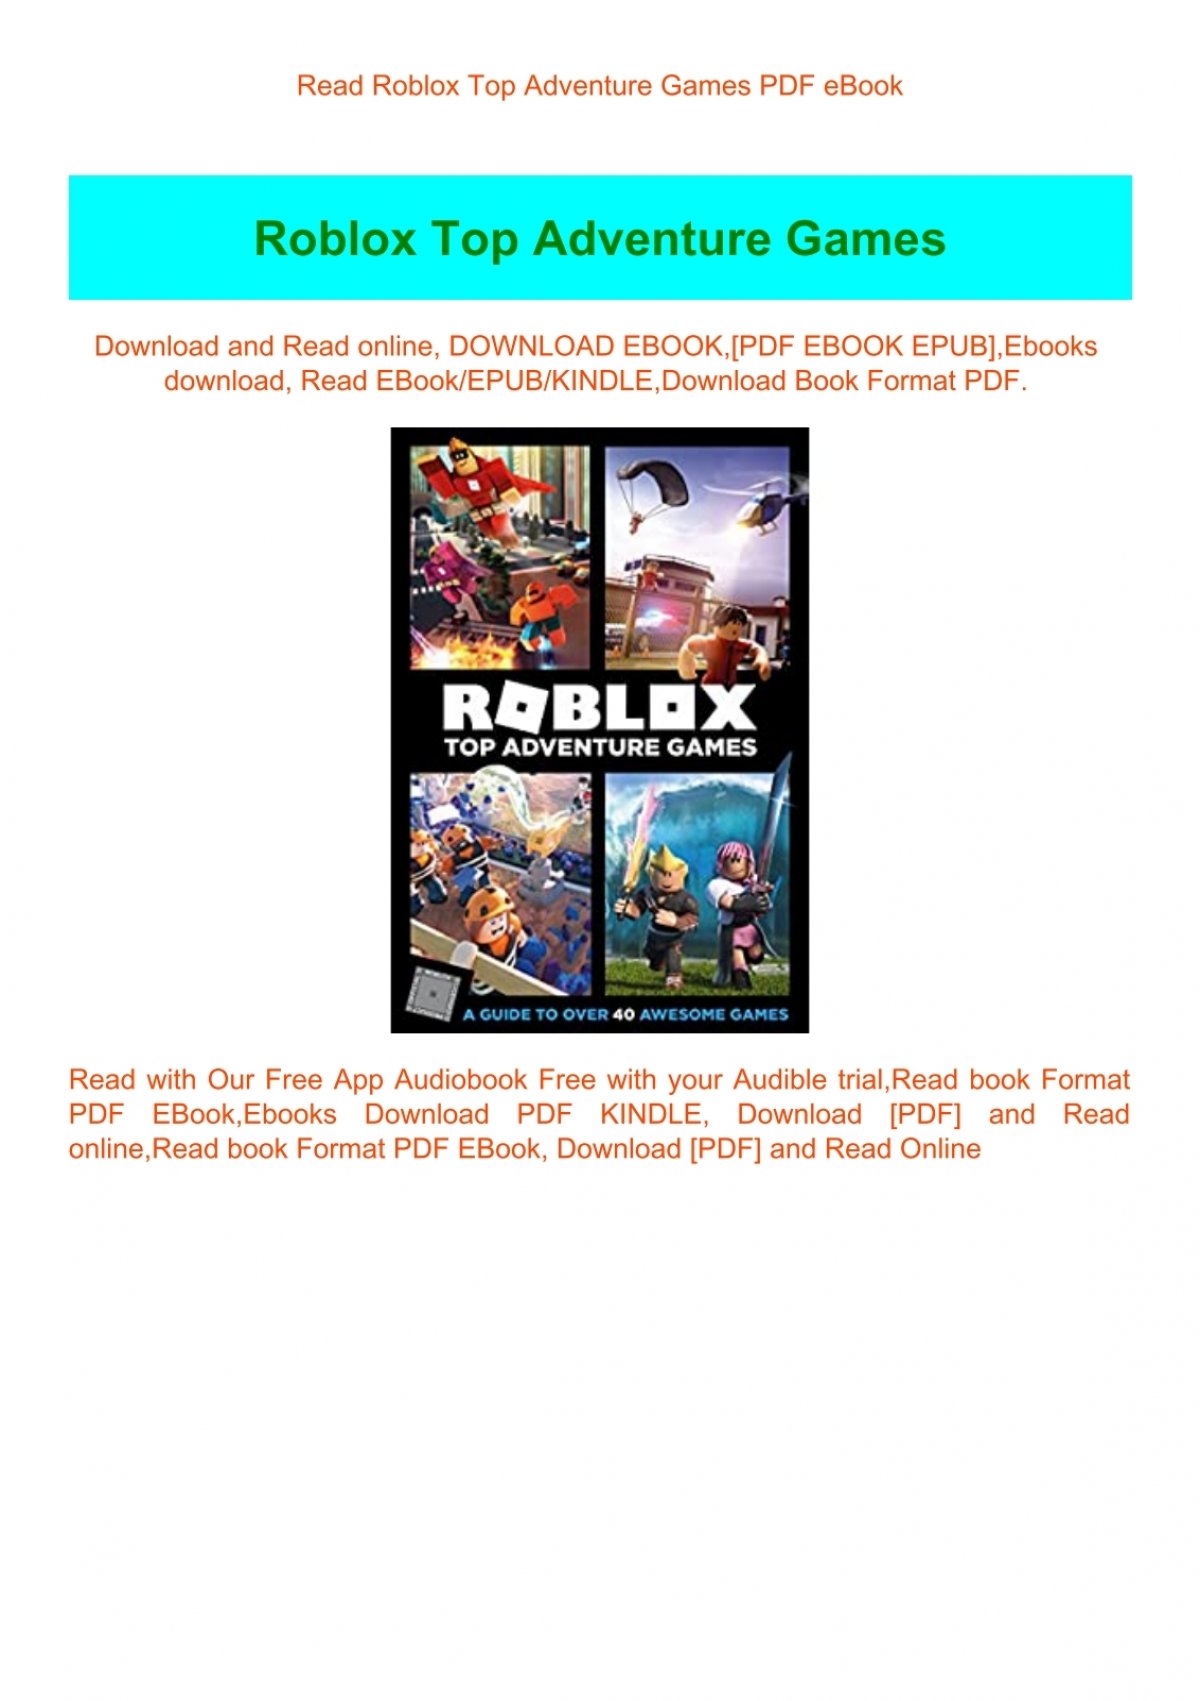 Read Roblox Top Adventure Games Pdf Ebook - roblox sign up on kindle